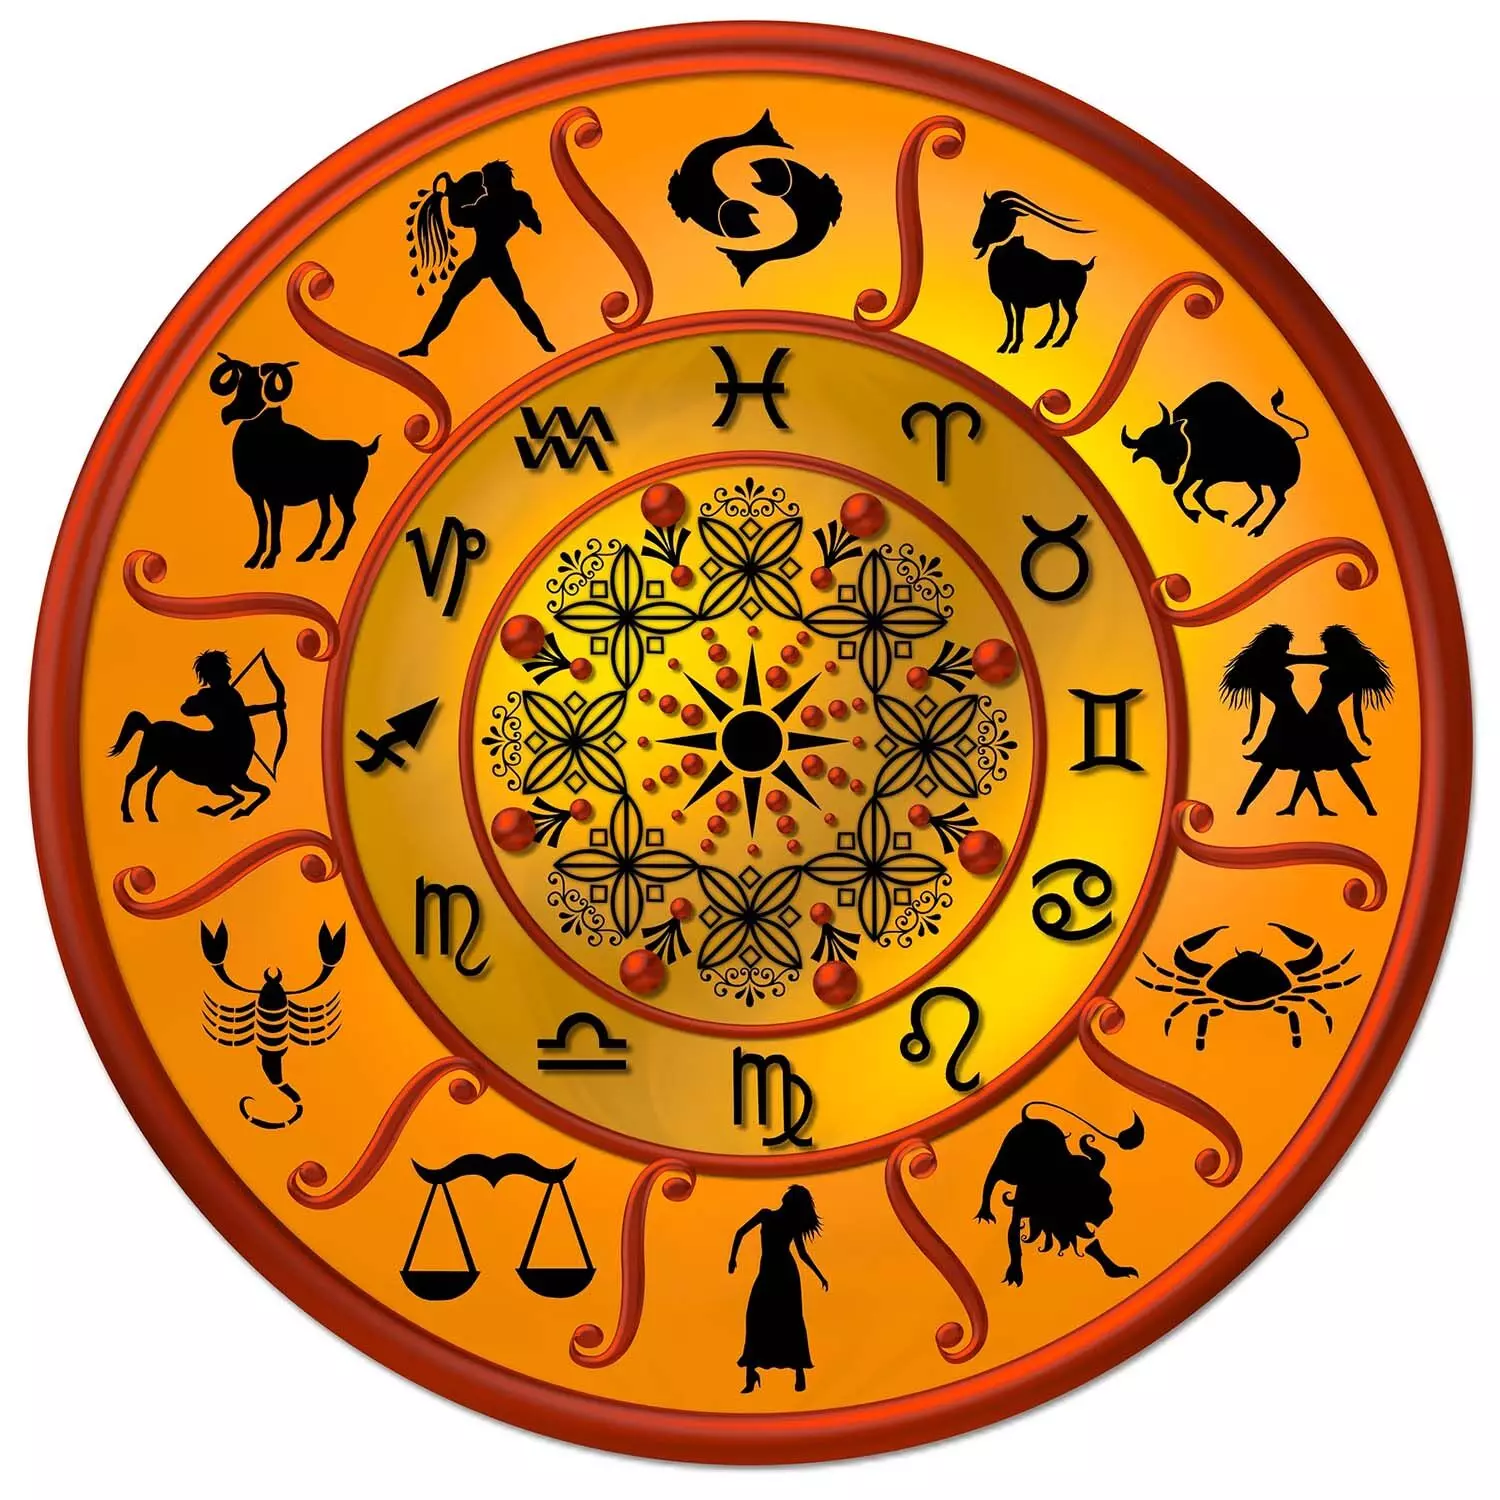 09 August  – Know your todays horoscope